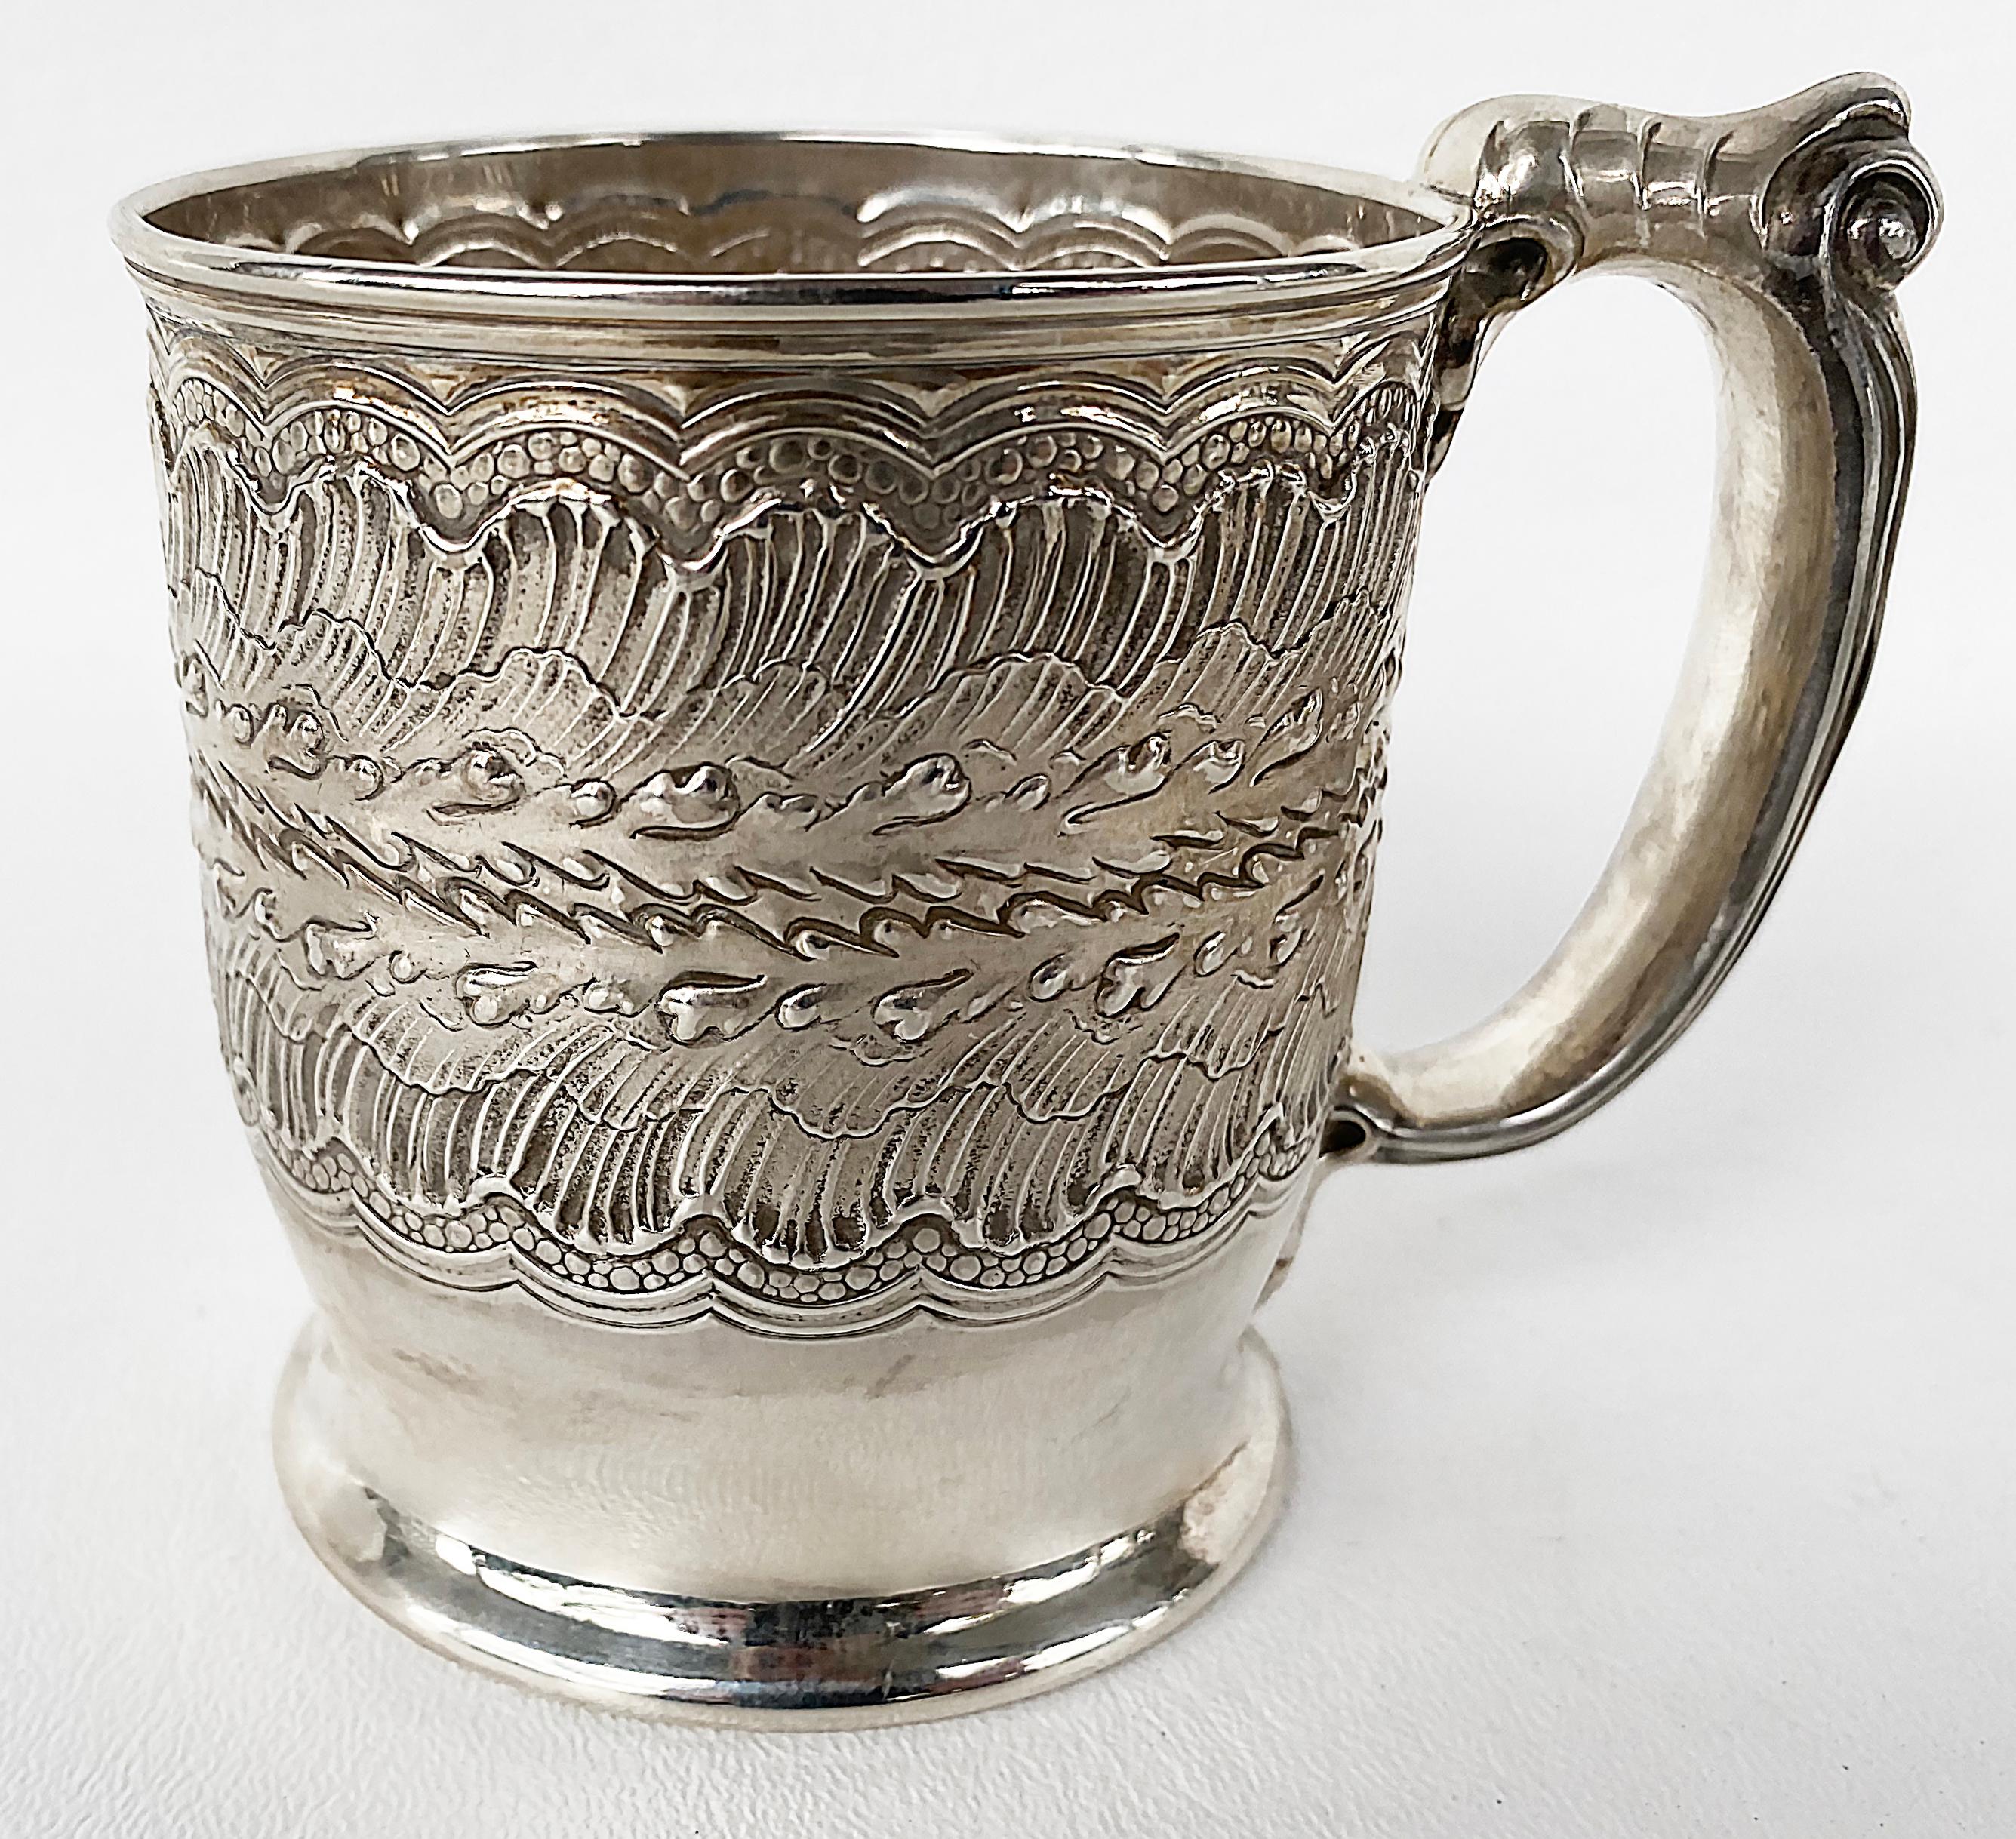 Repoussé Antique Sterling Silver Repousse Baby Cup with Handle, Circa 1900